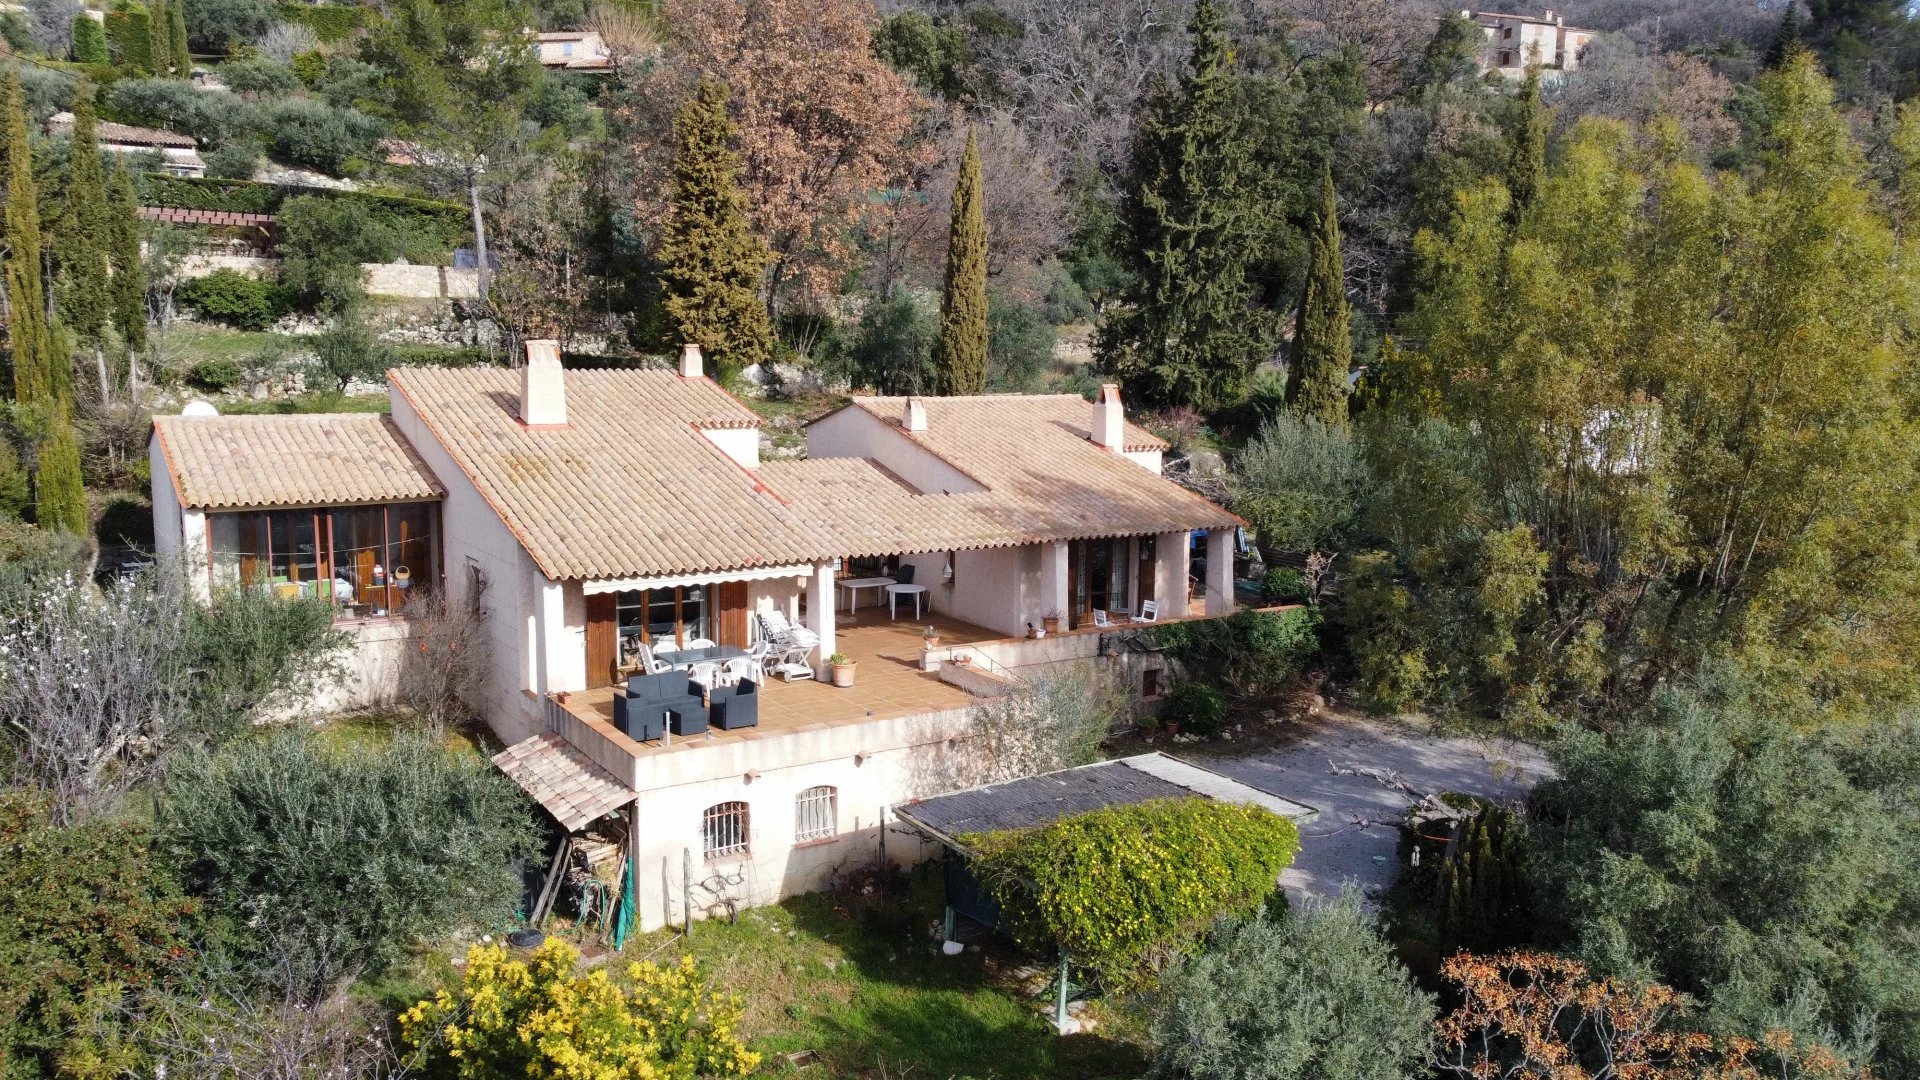 Villa with panoramic views and close to the village